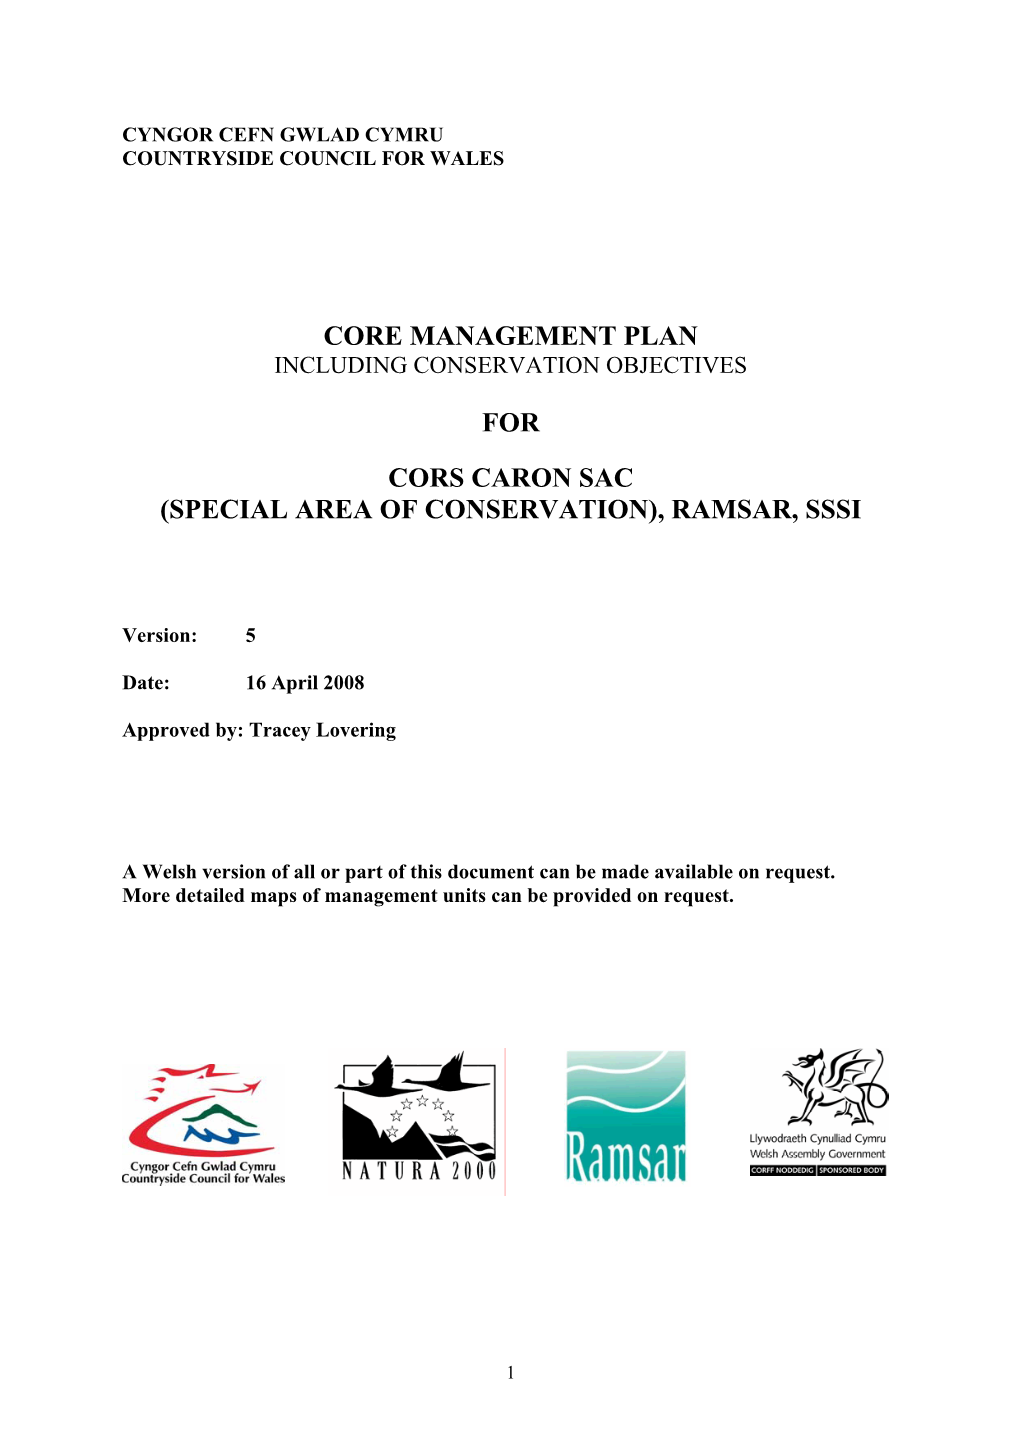 Core Management Plan for Cors Caron Sac (Special